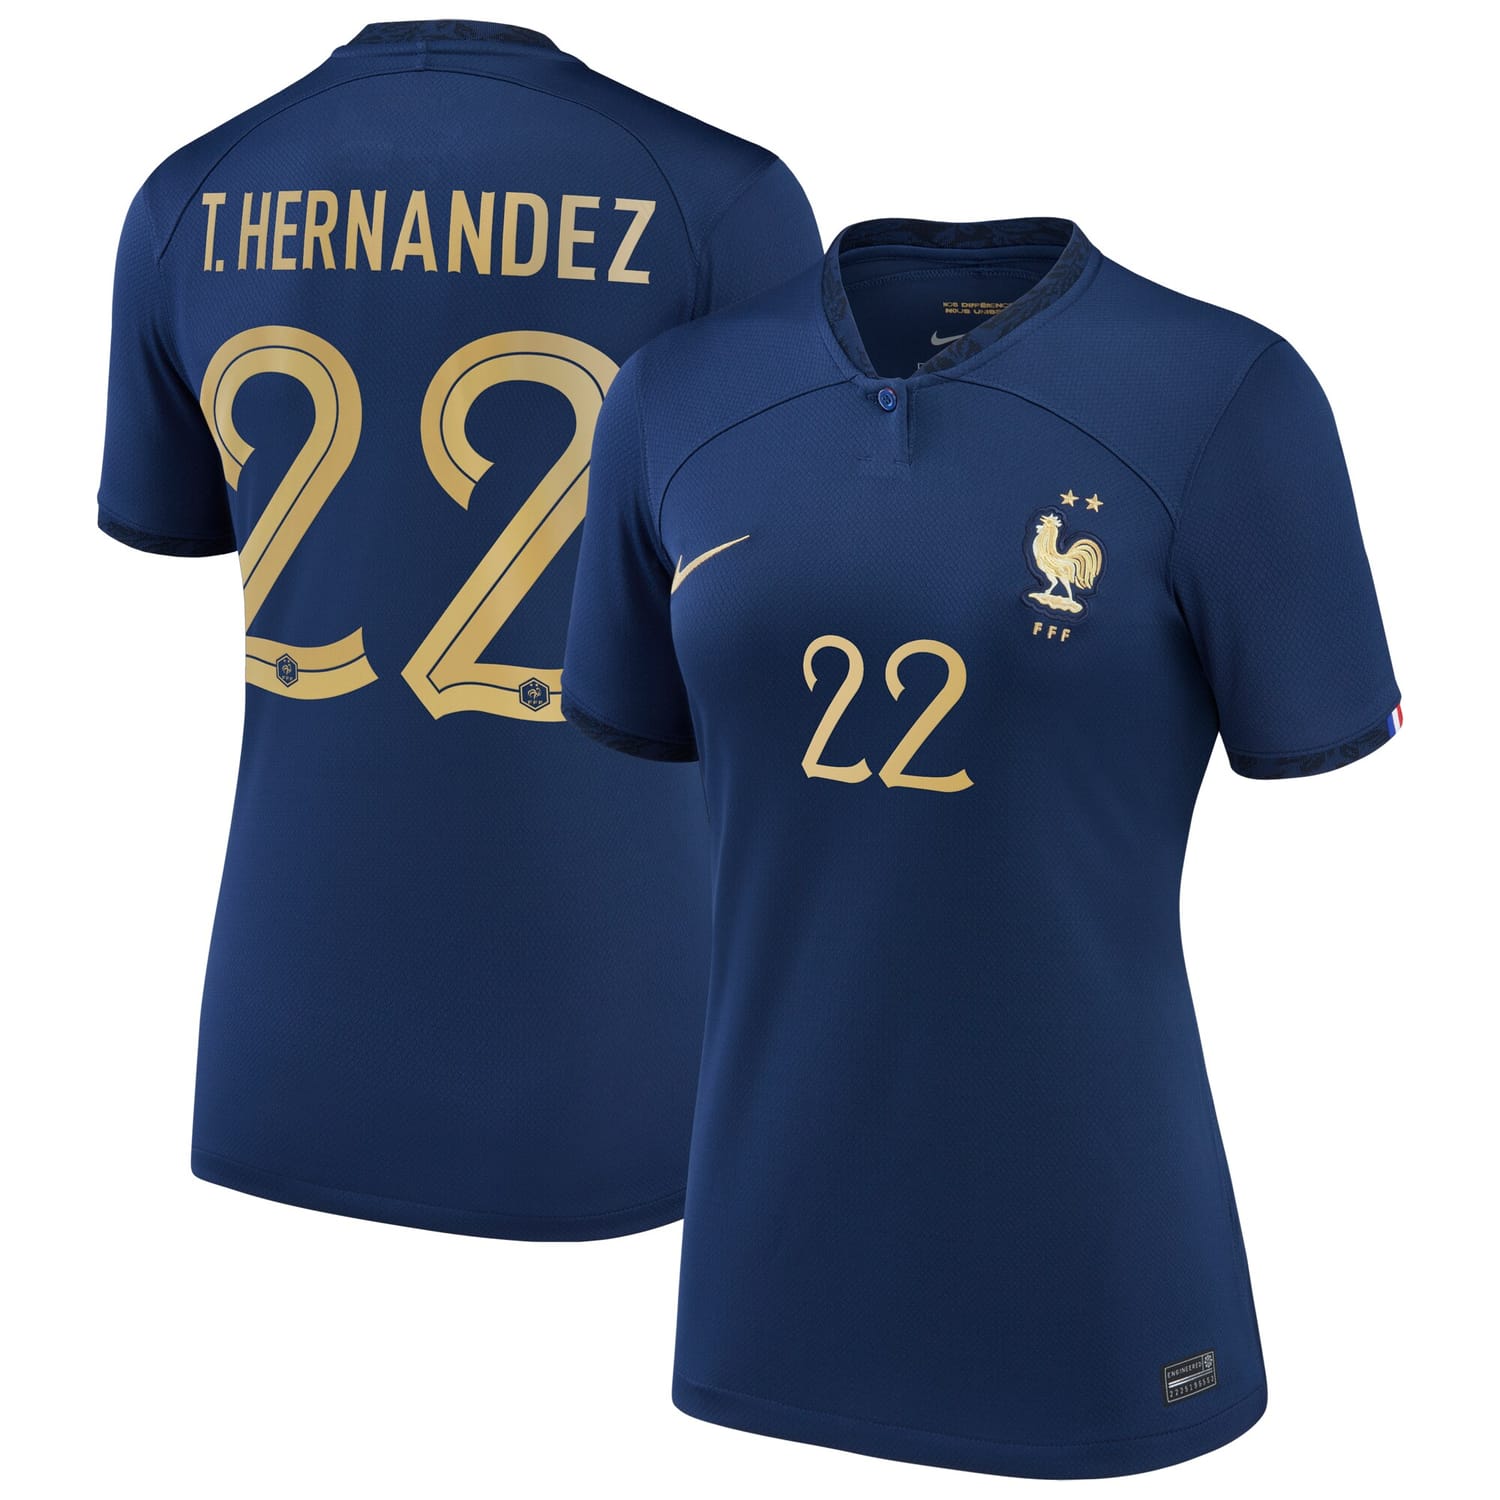 France National Team Home Jersey Shirt 2022 player Theo Hernandez printing for Women